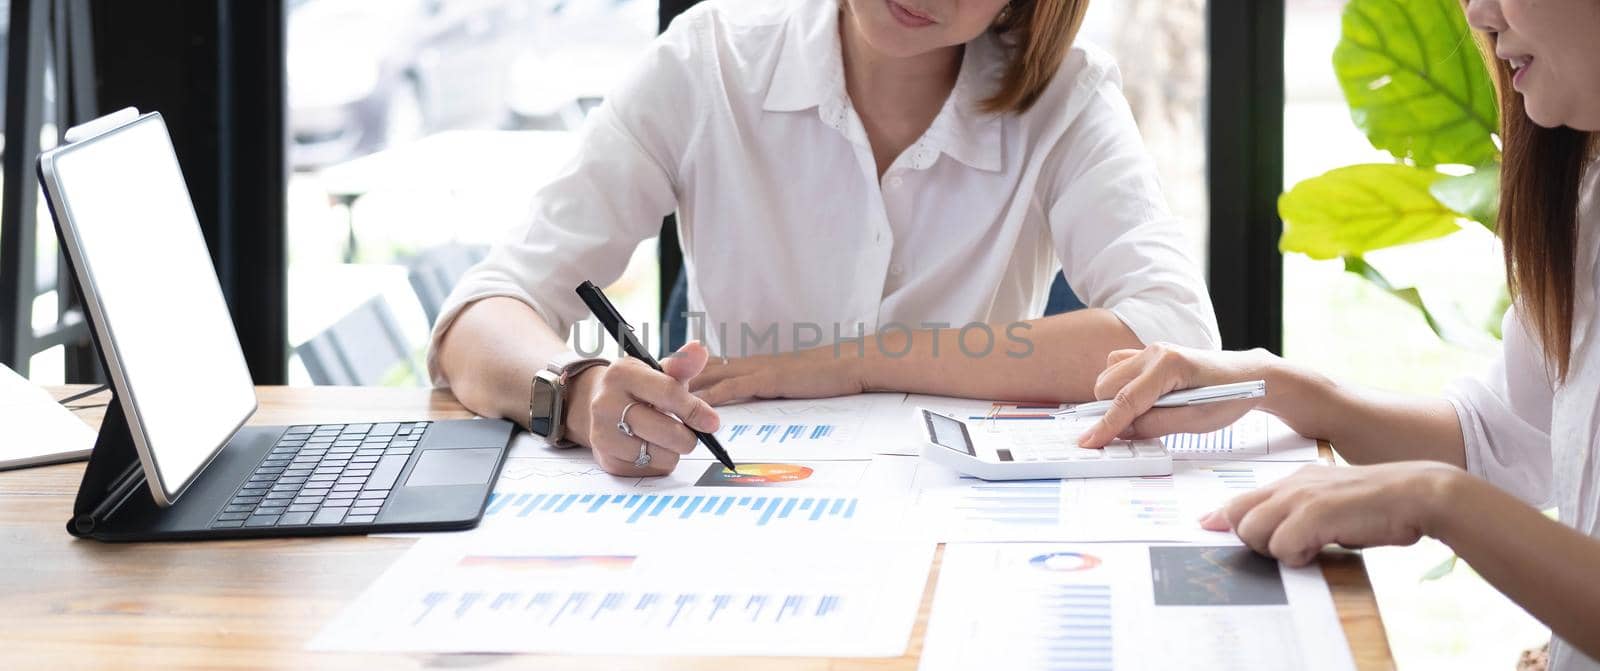 Two women analyzing documents while sitting on a table in office. Woman executives at work in office discussing some paperwork..